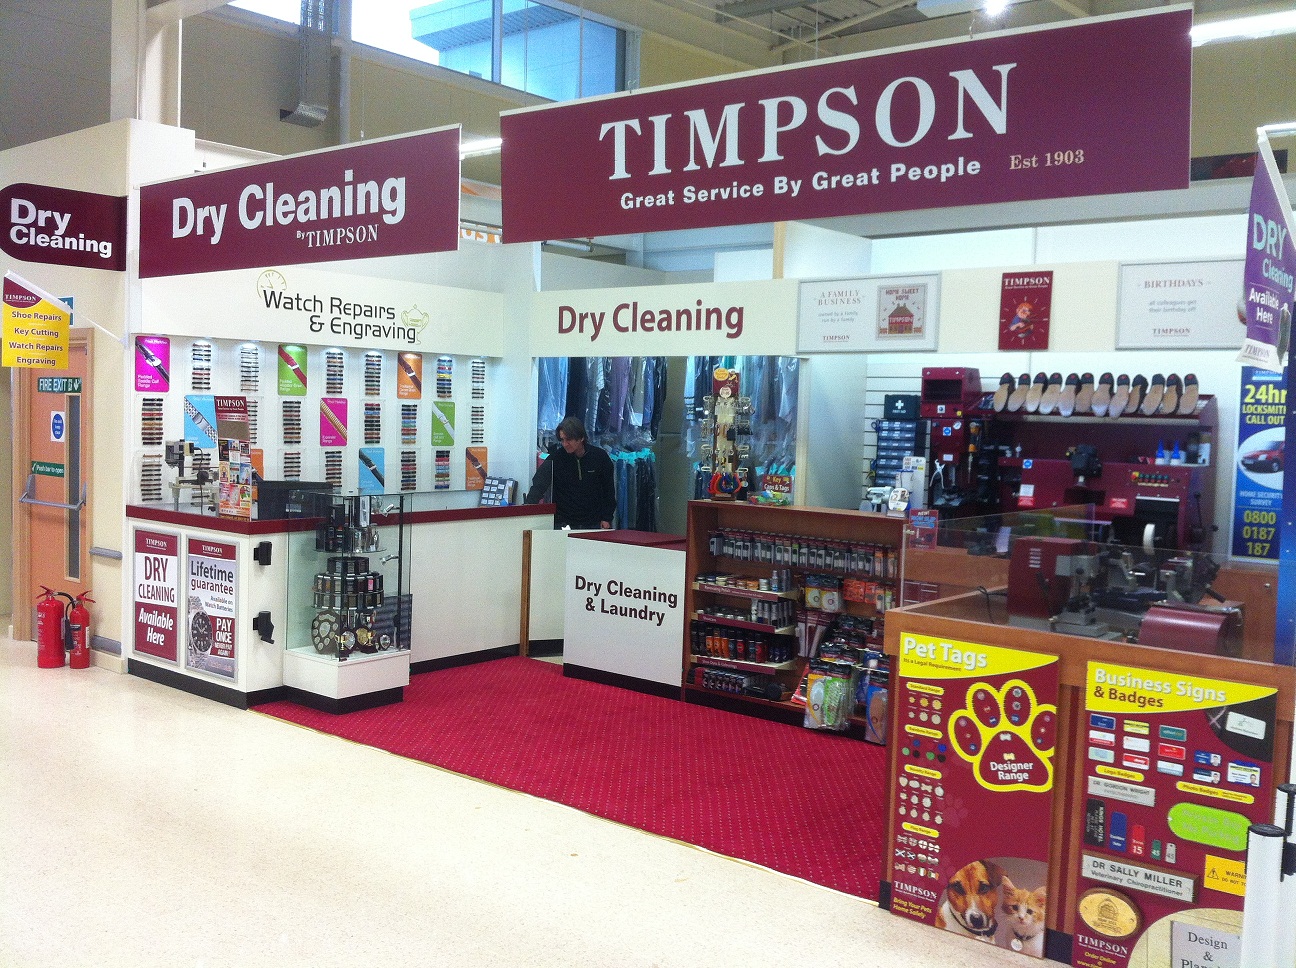 Timpson - Introduction to Timpson services